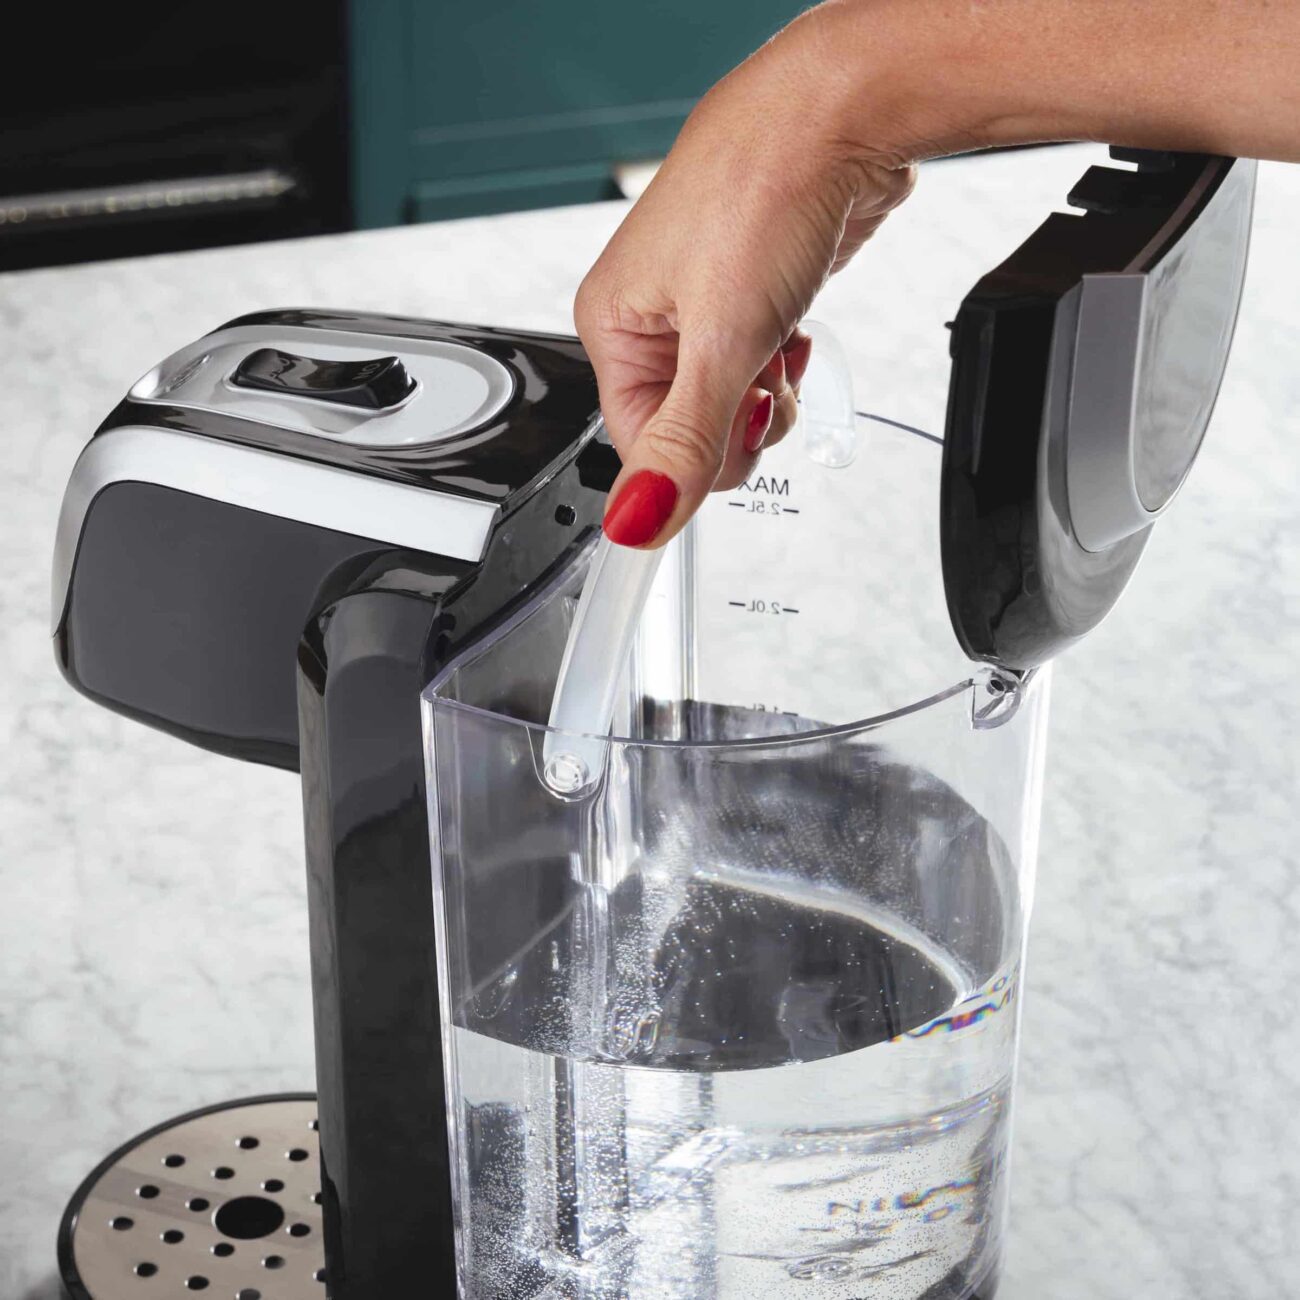 Purifiers are used in our homes to provide clean, hygienic, safe drinking water. Here's our tank vs. tankless water dispenser review.